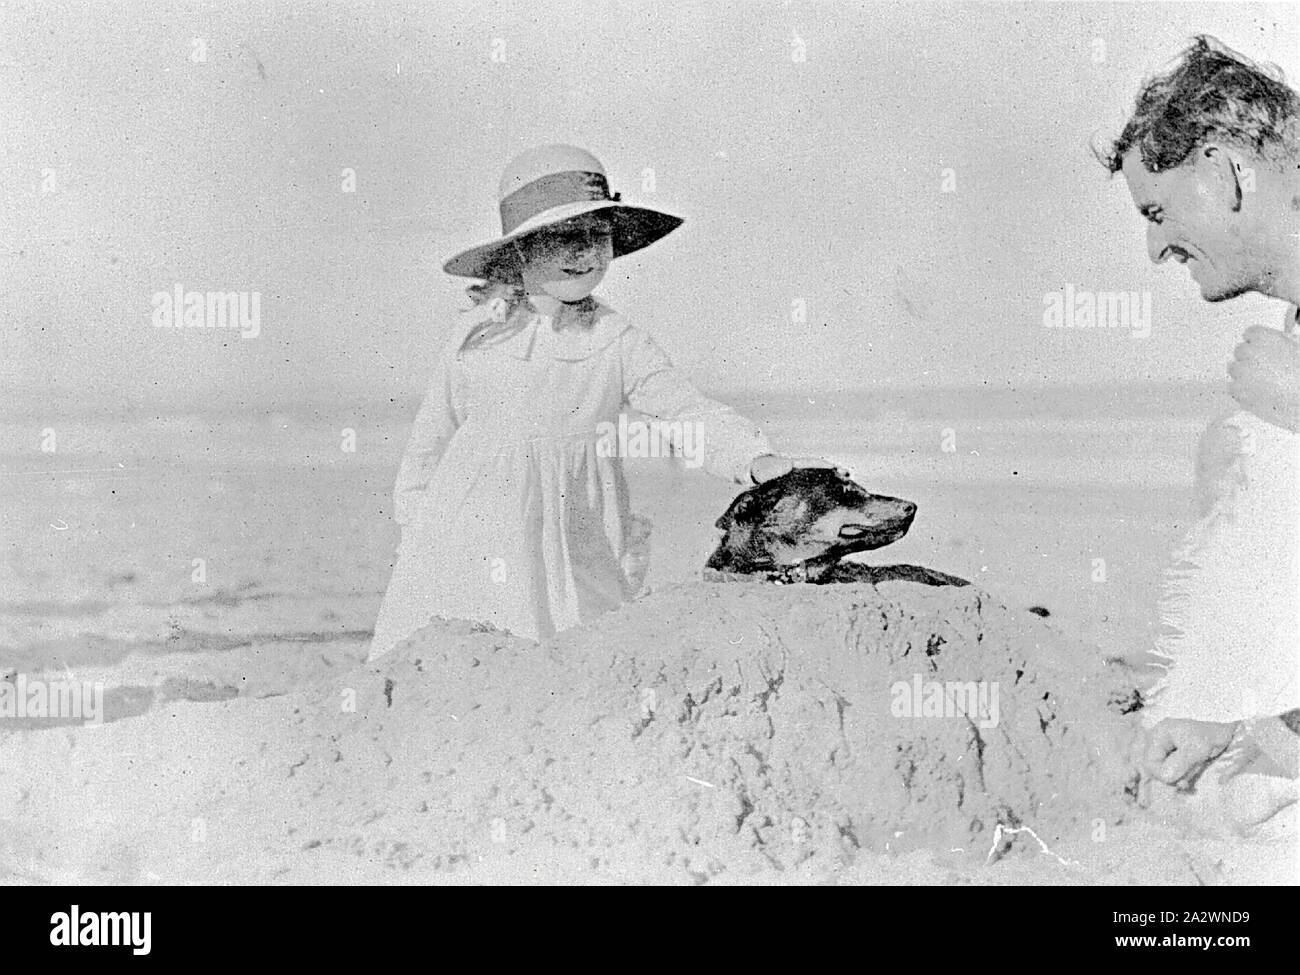 Negative - Girl Petting a Dog on the Beach, Lorne, Victoria, 1920, A young girl appearing to bury a dog in the sand. (He is either a very good natured dog or it is a trick photograph with the dog behind the sand mound Stock Photo